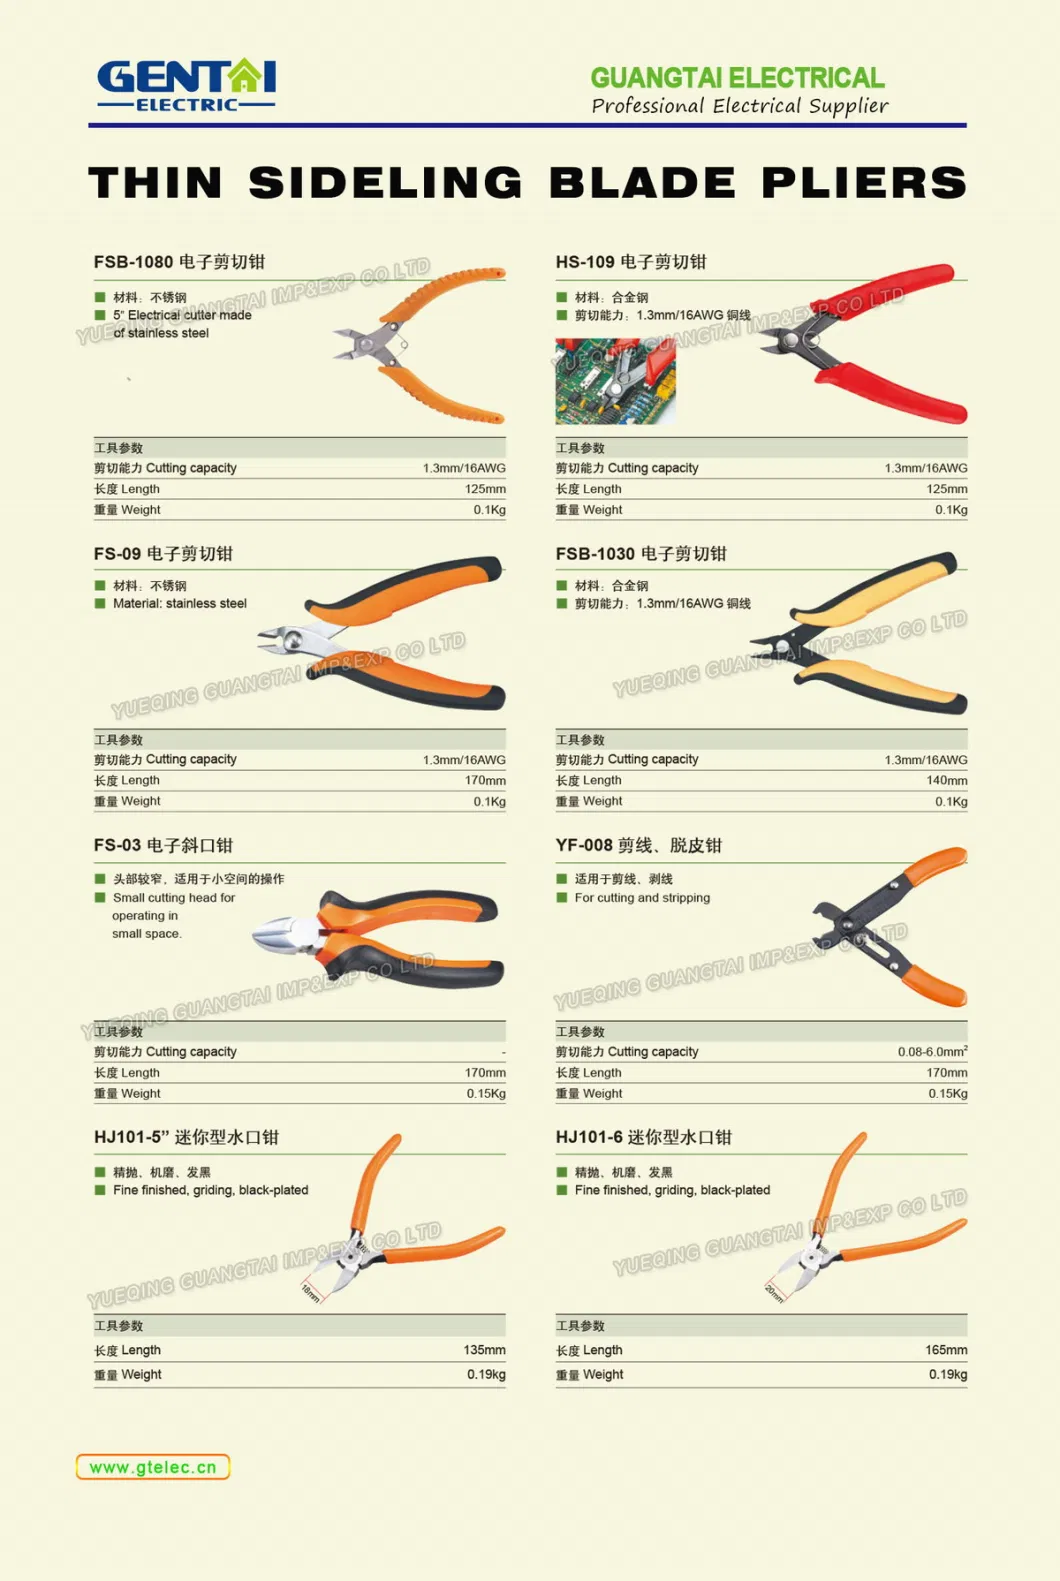 Manual Ratchet Cable Cutter for Copper Cable and Armoured Cable